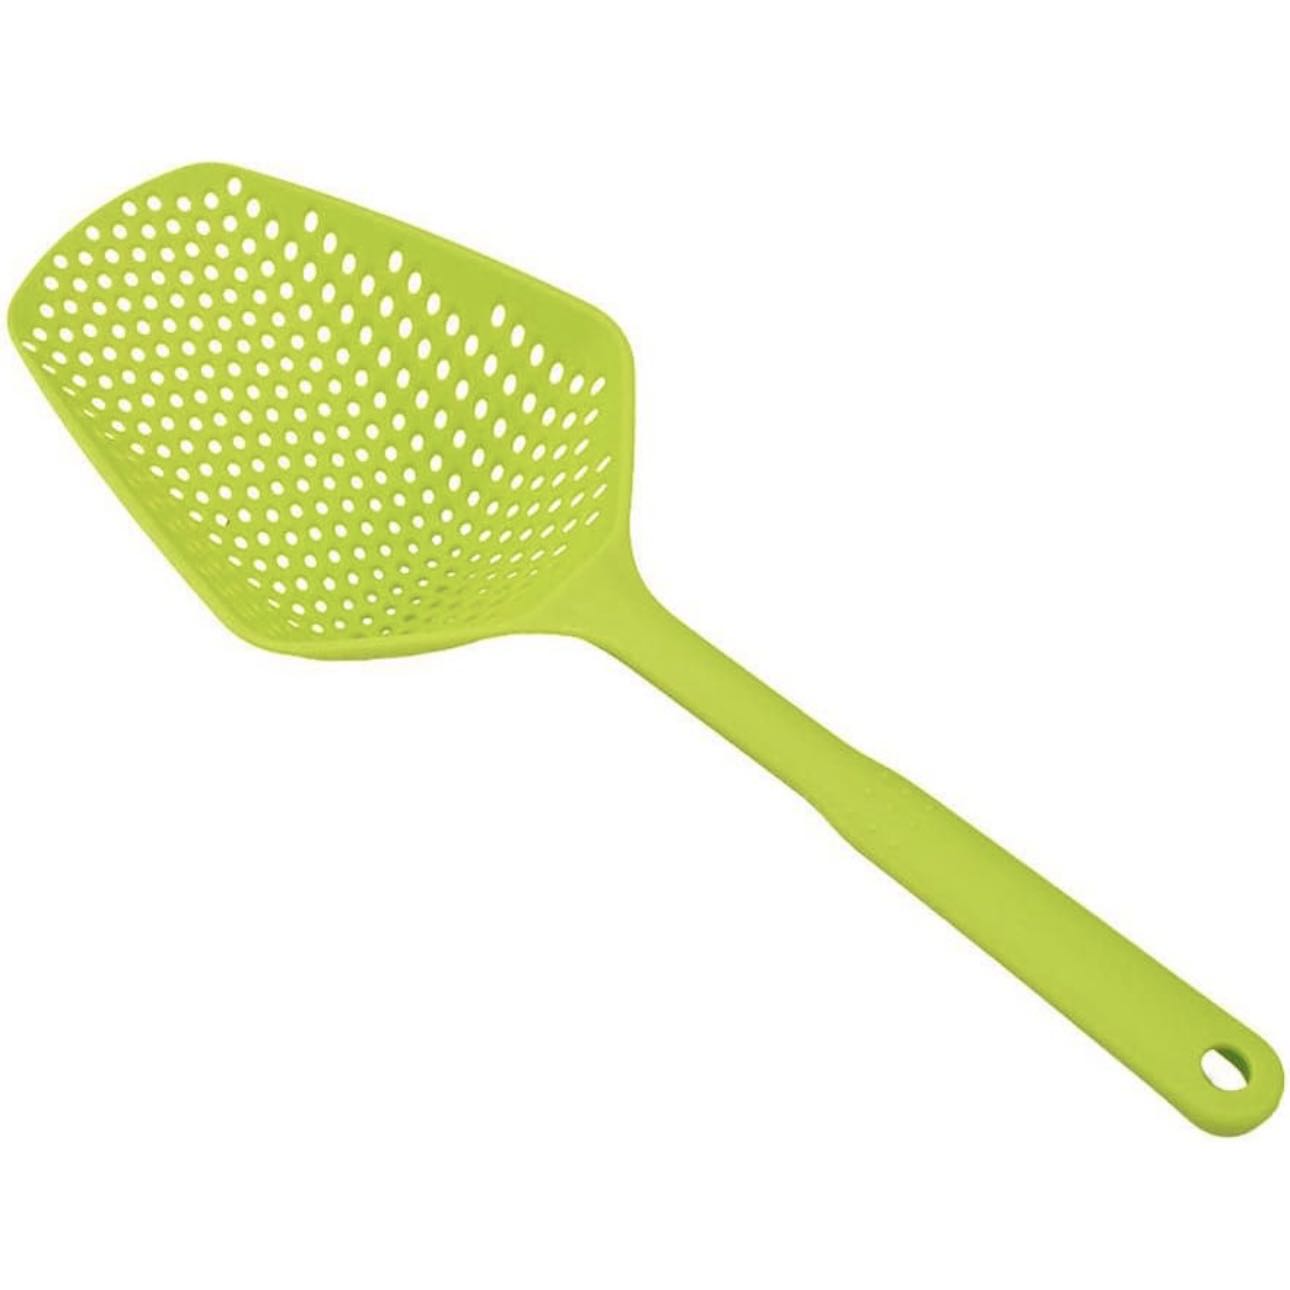 

Large Strainer Spoon Long Handle Tool Colander Draining Scoop Pasta Strainer Cooking Kitchen For Spaghetti, Noodles, Veggies 13.5'' Utensils, Green